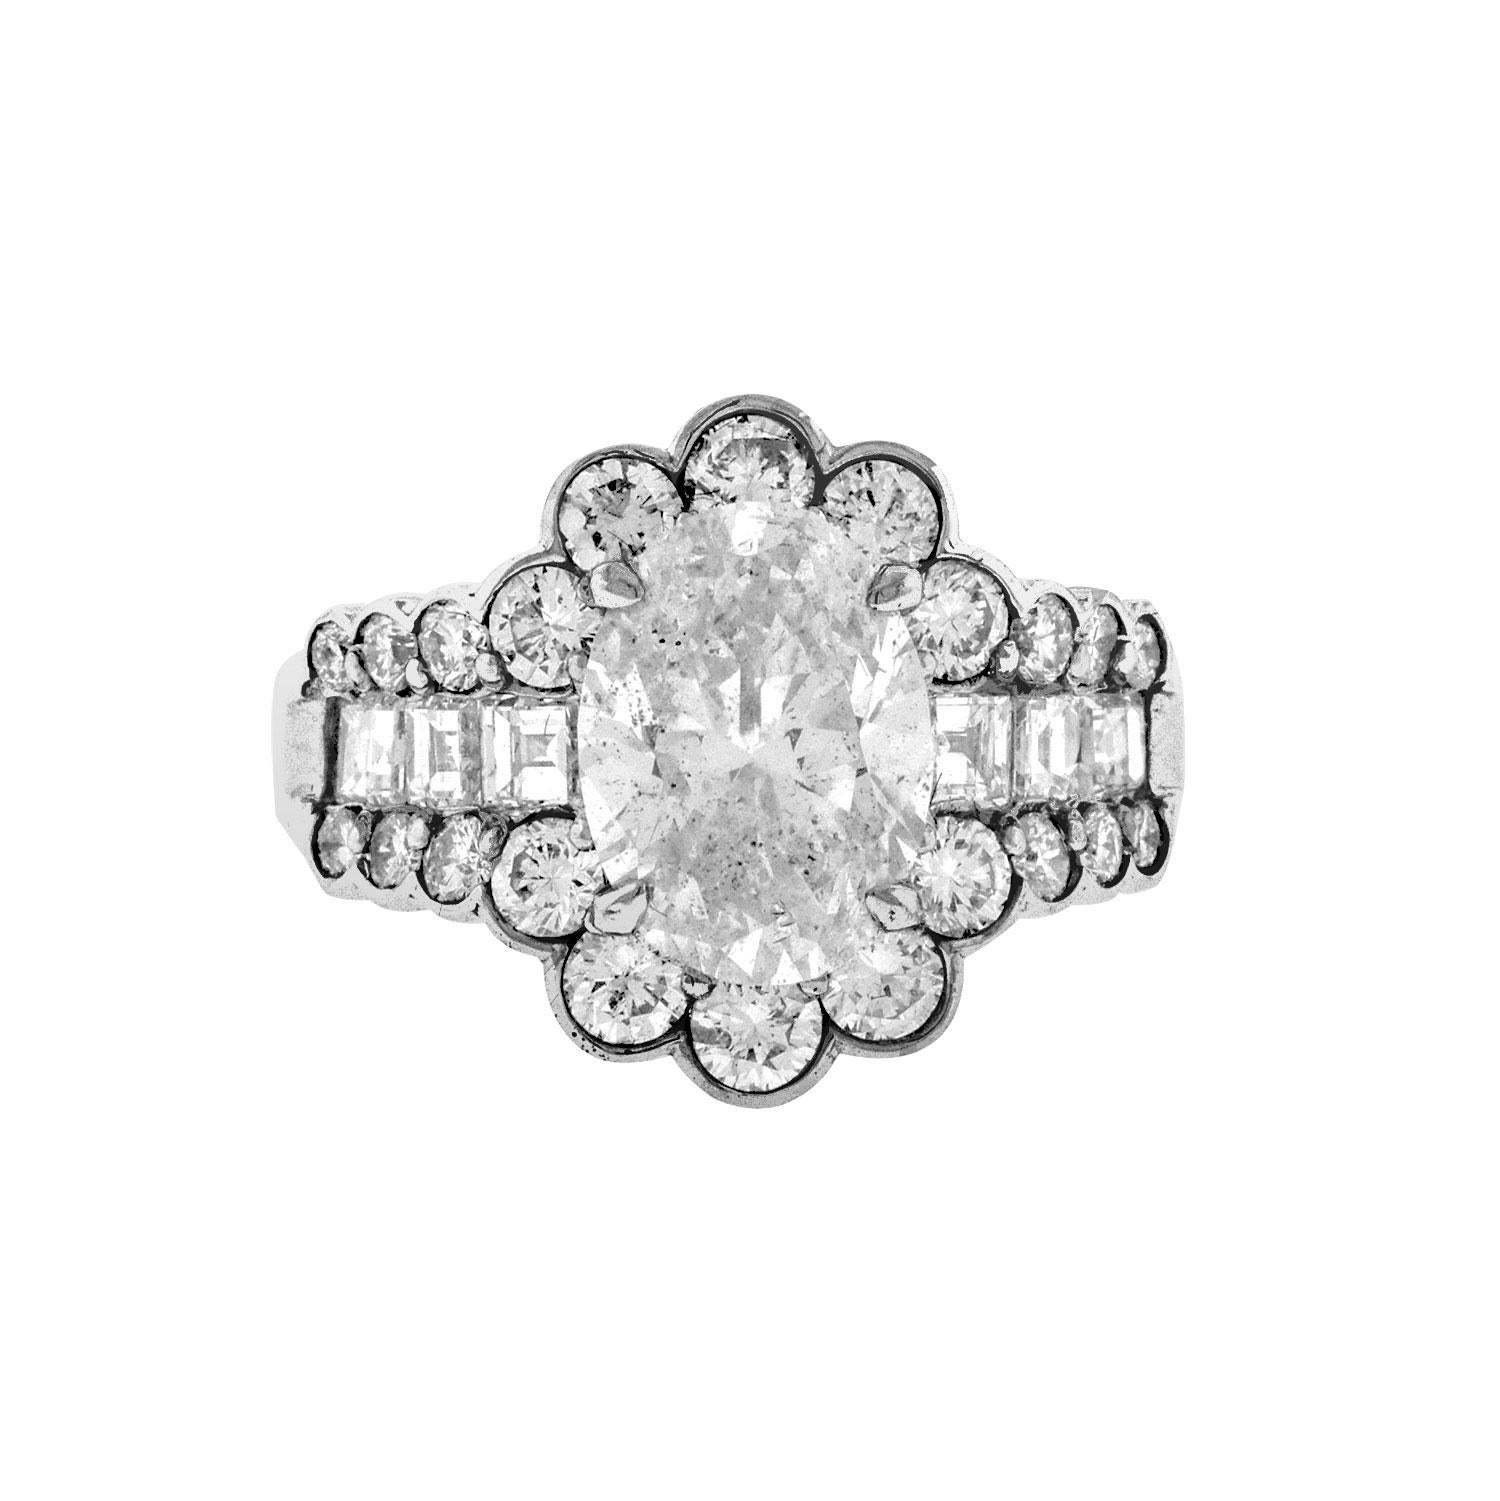 A gorgeous design, this platinum made ring features a 2.52 carat oval-shaped diamond. It is accented by 2.47 carats of round brilliant and square-baguette diamonds set around the oval diamond. Hand-fabricated in platinum and ready to be worn. The